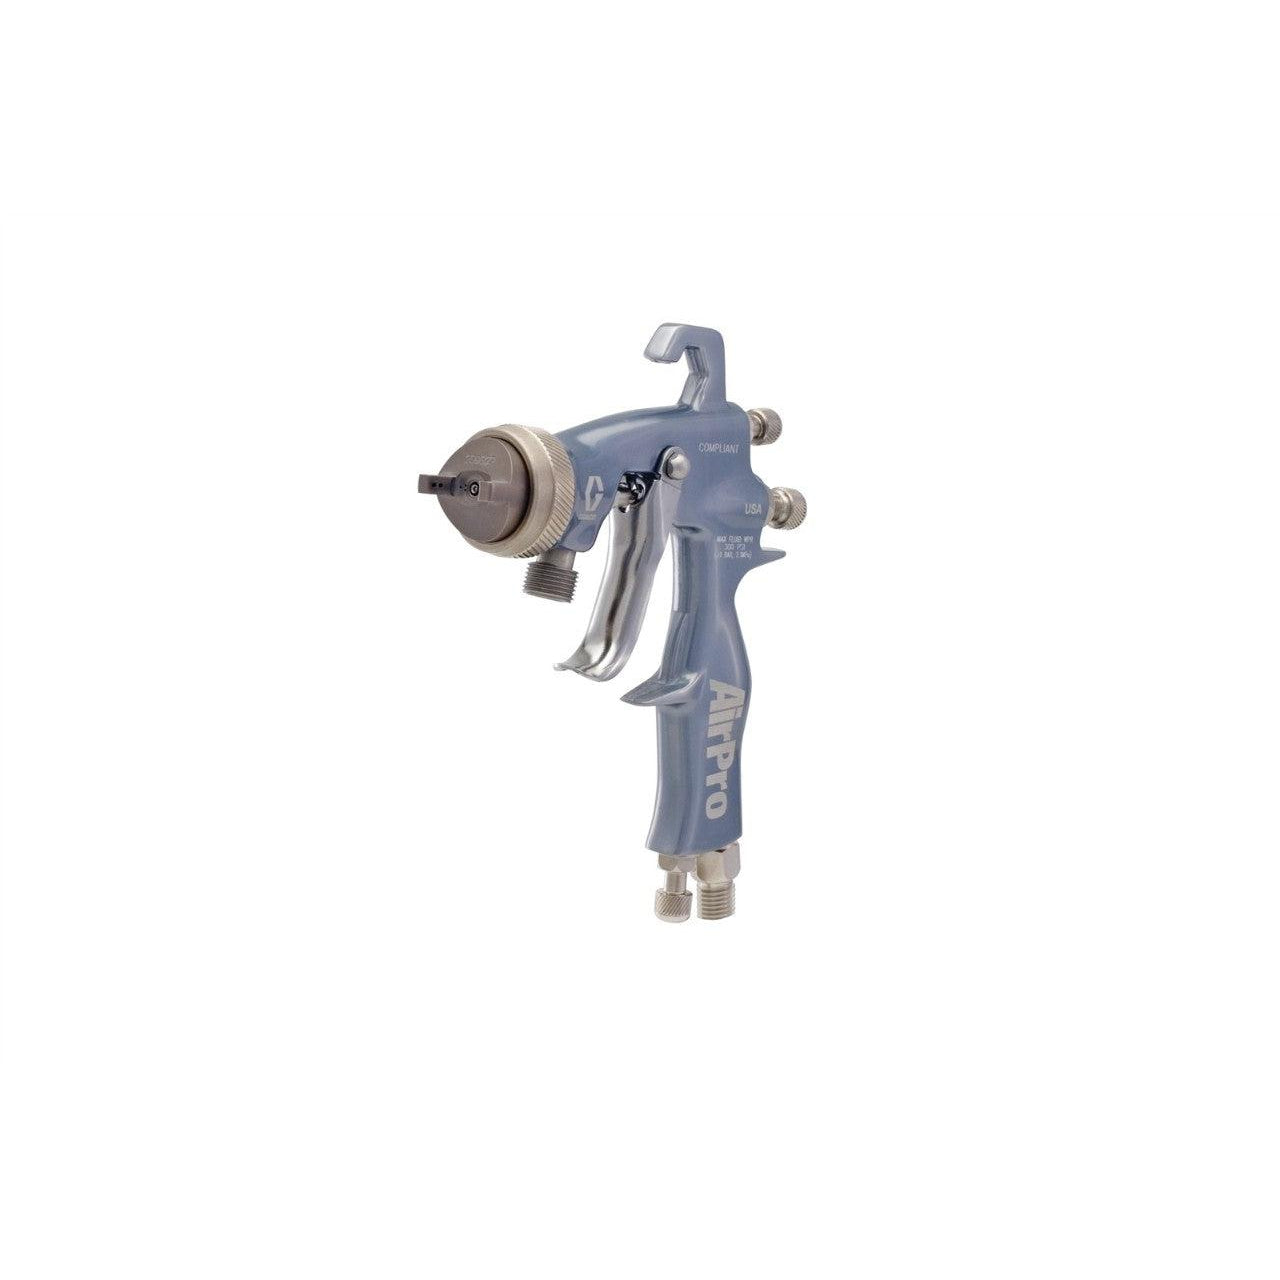 AirPro Air Spray Pressure Feed Gun, Compliant, 0.059 inch (1.5 mm) Nozzle, for High Wear Applications